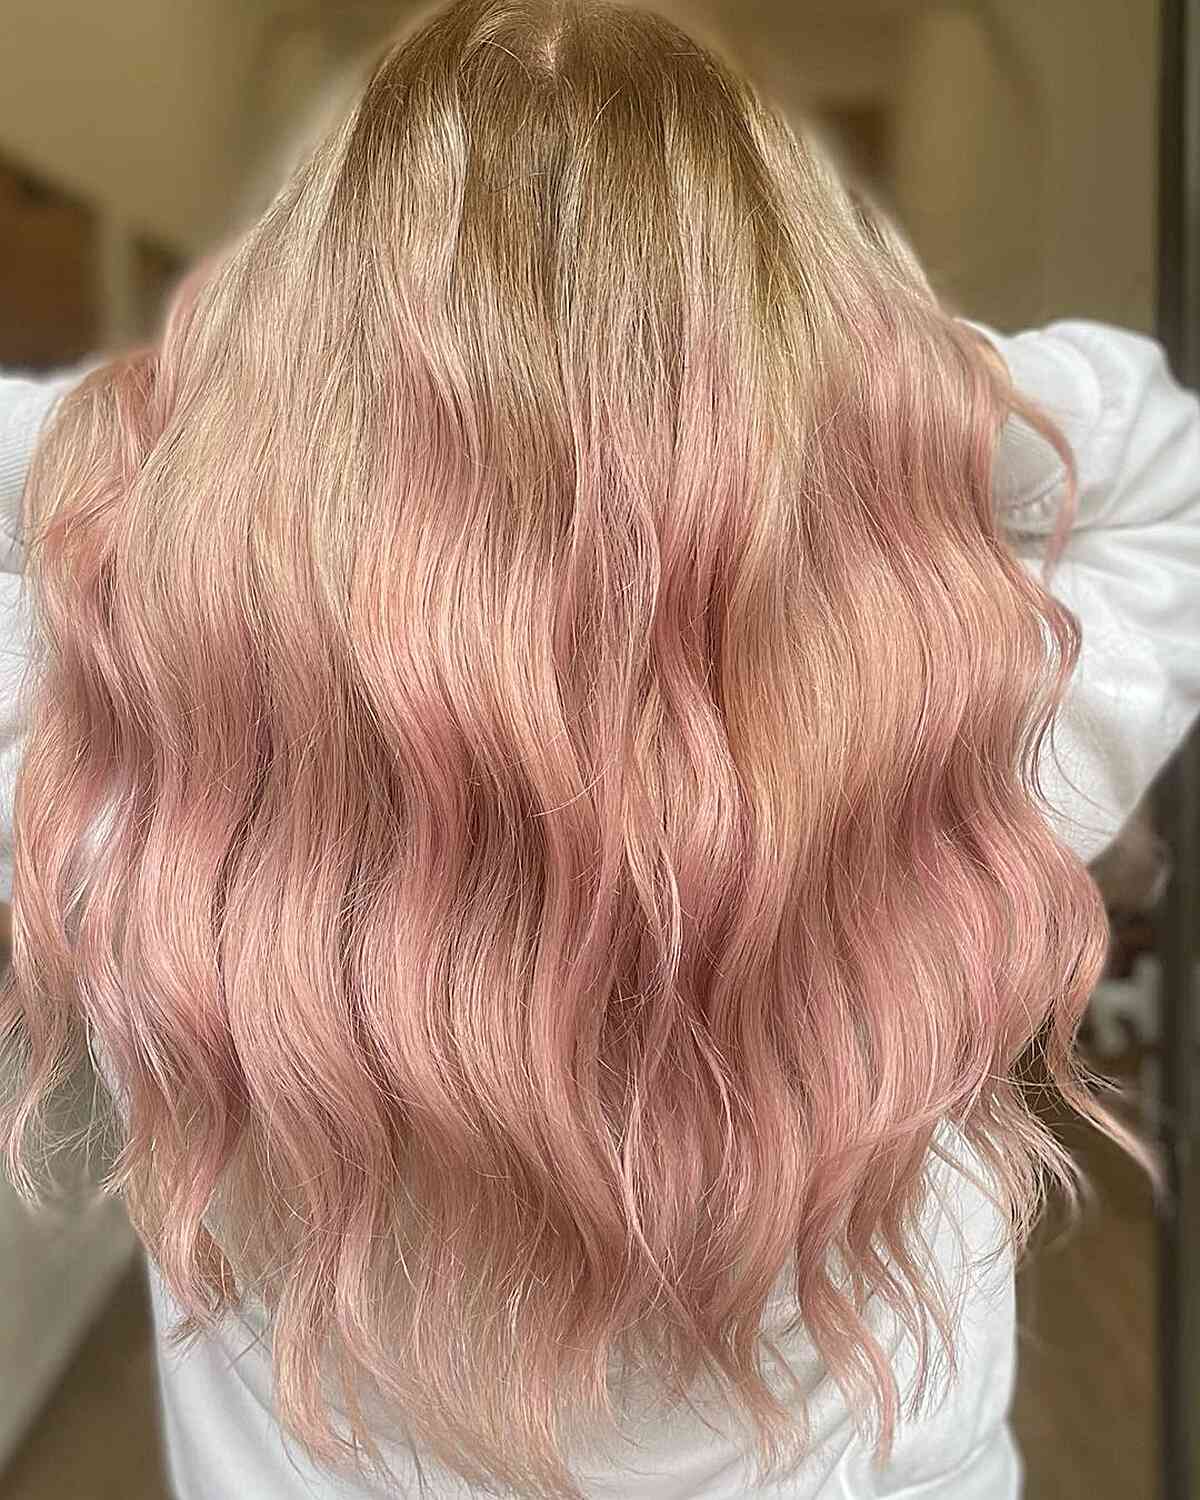 Buttery Blonde base hair color with Light Rose Gold Highlights on long hair